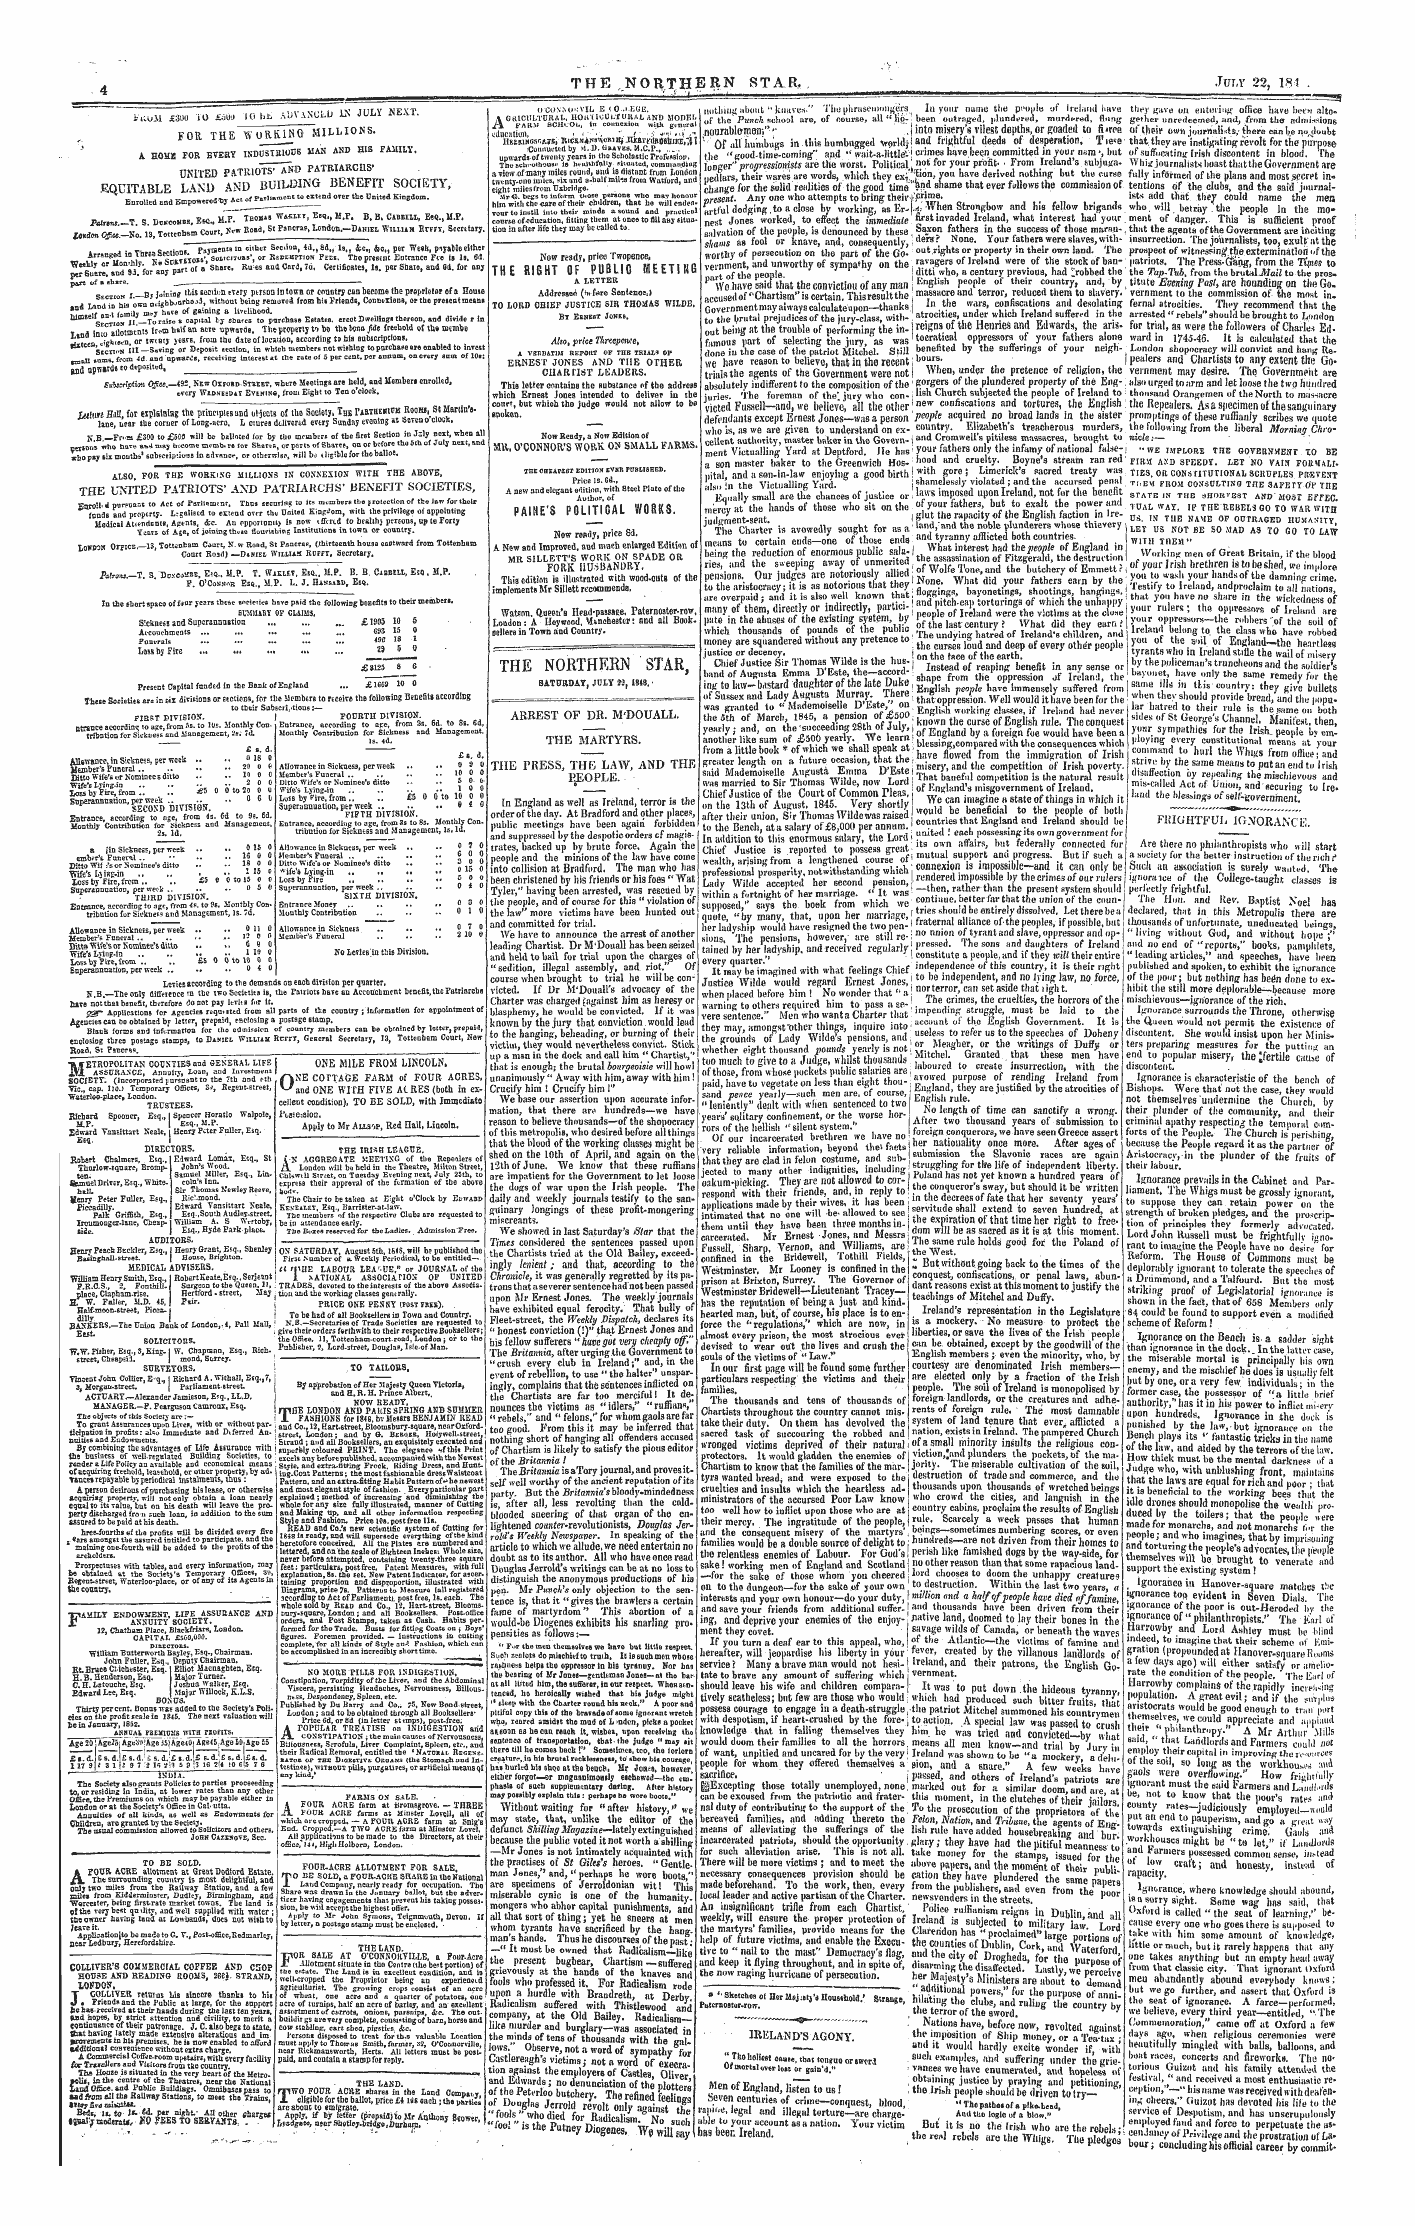 Northern Star (1837-1852): jS F Y, 1st edition - The Northern Star, Saturday , July 22 , 1848 . •